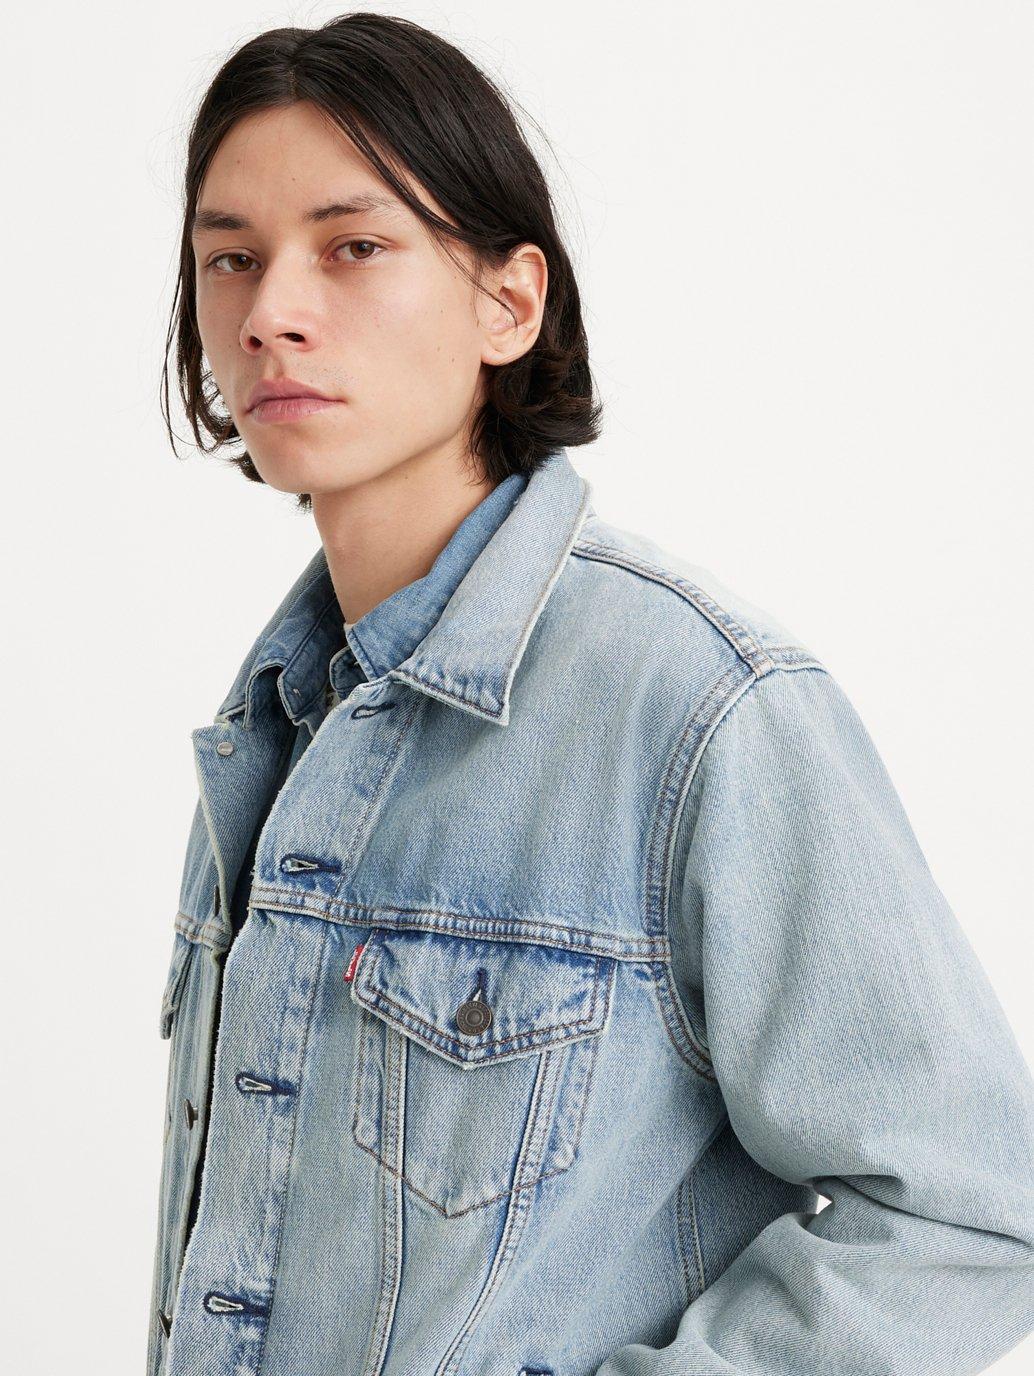 Buy Levi's® Men's Relaxed Fit Trucker Jacket| Levi's Official Online ...